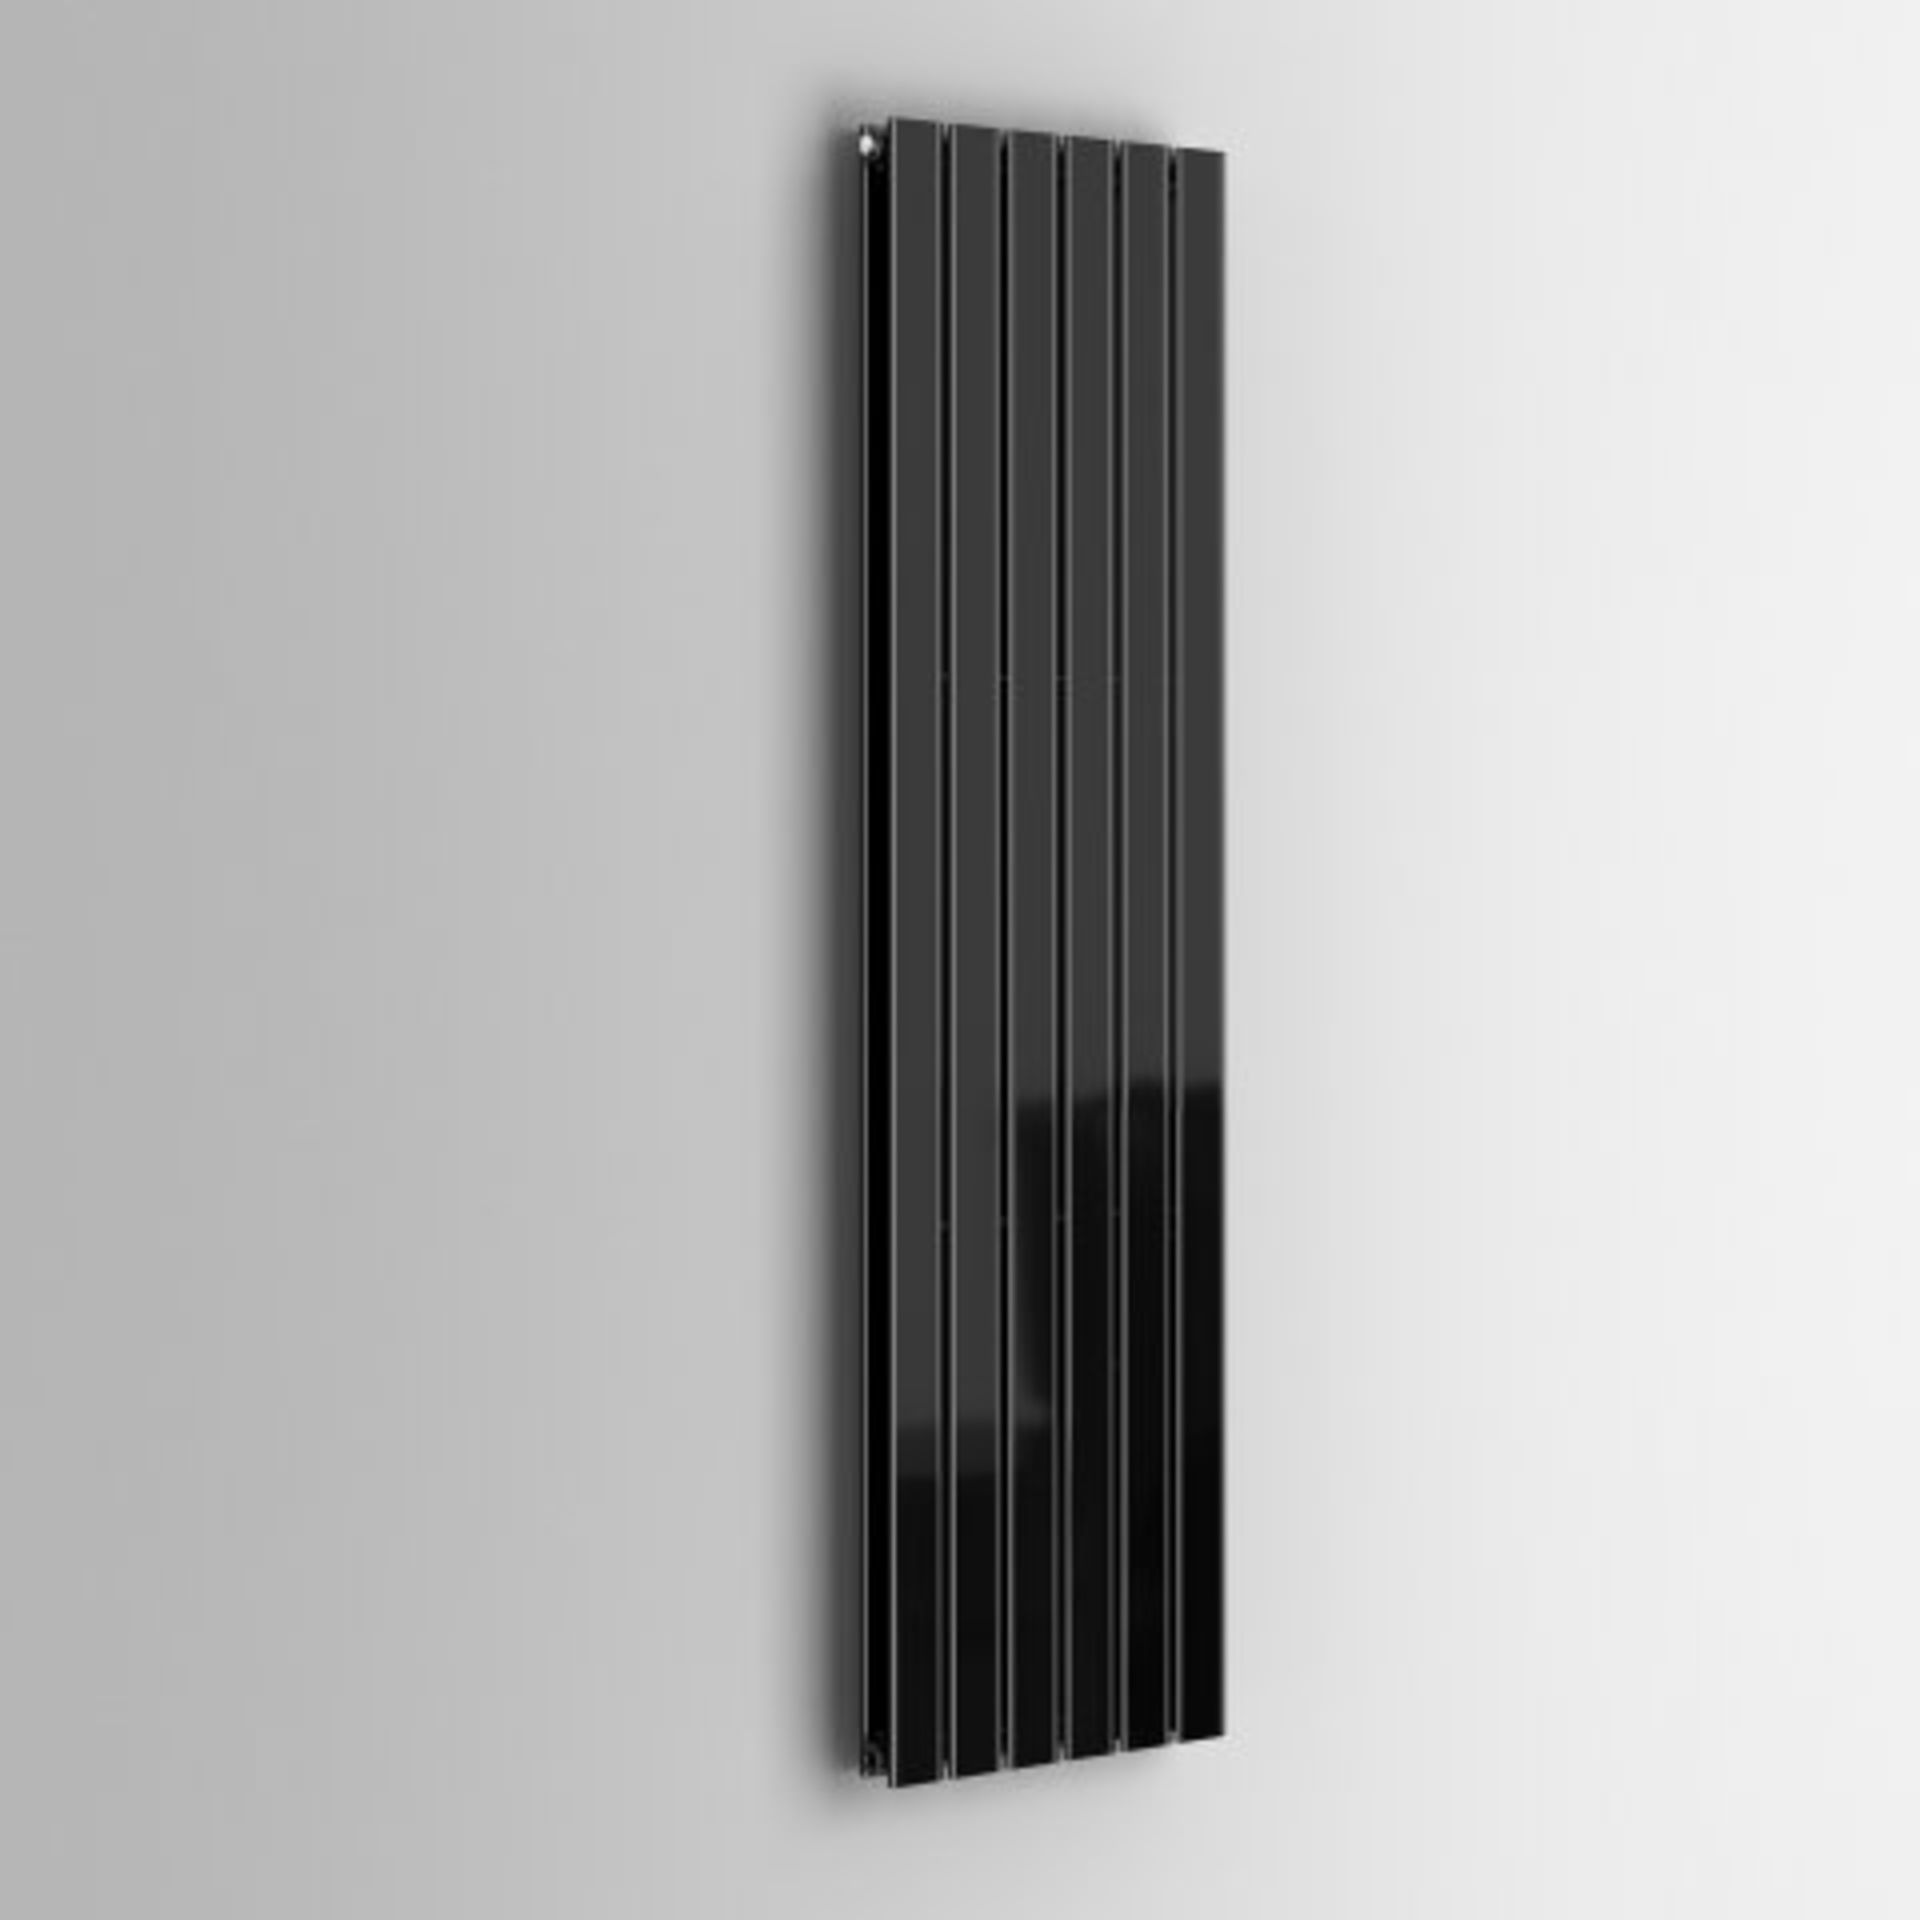 (M77) 1800x458mm Gloss Black Double Flat Panel Vertical Radiator - Thera Range. RRP £524.99. Our - Image 4 of 4